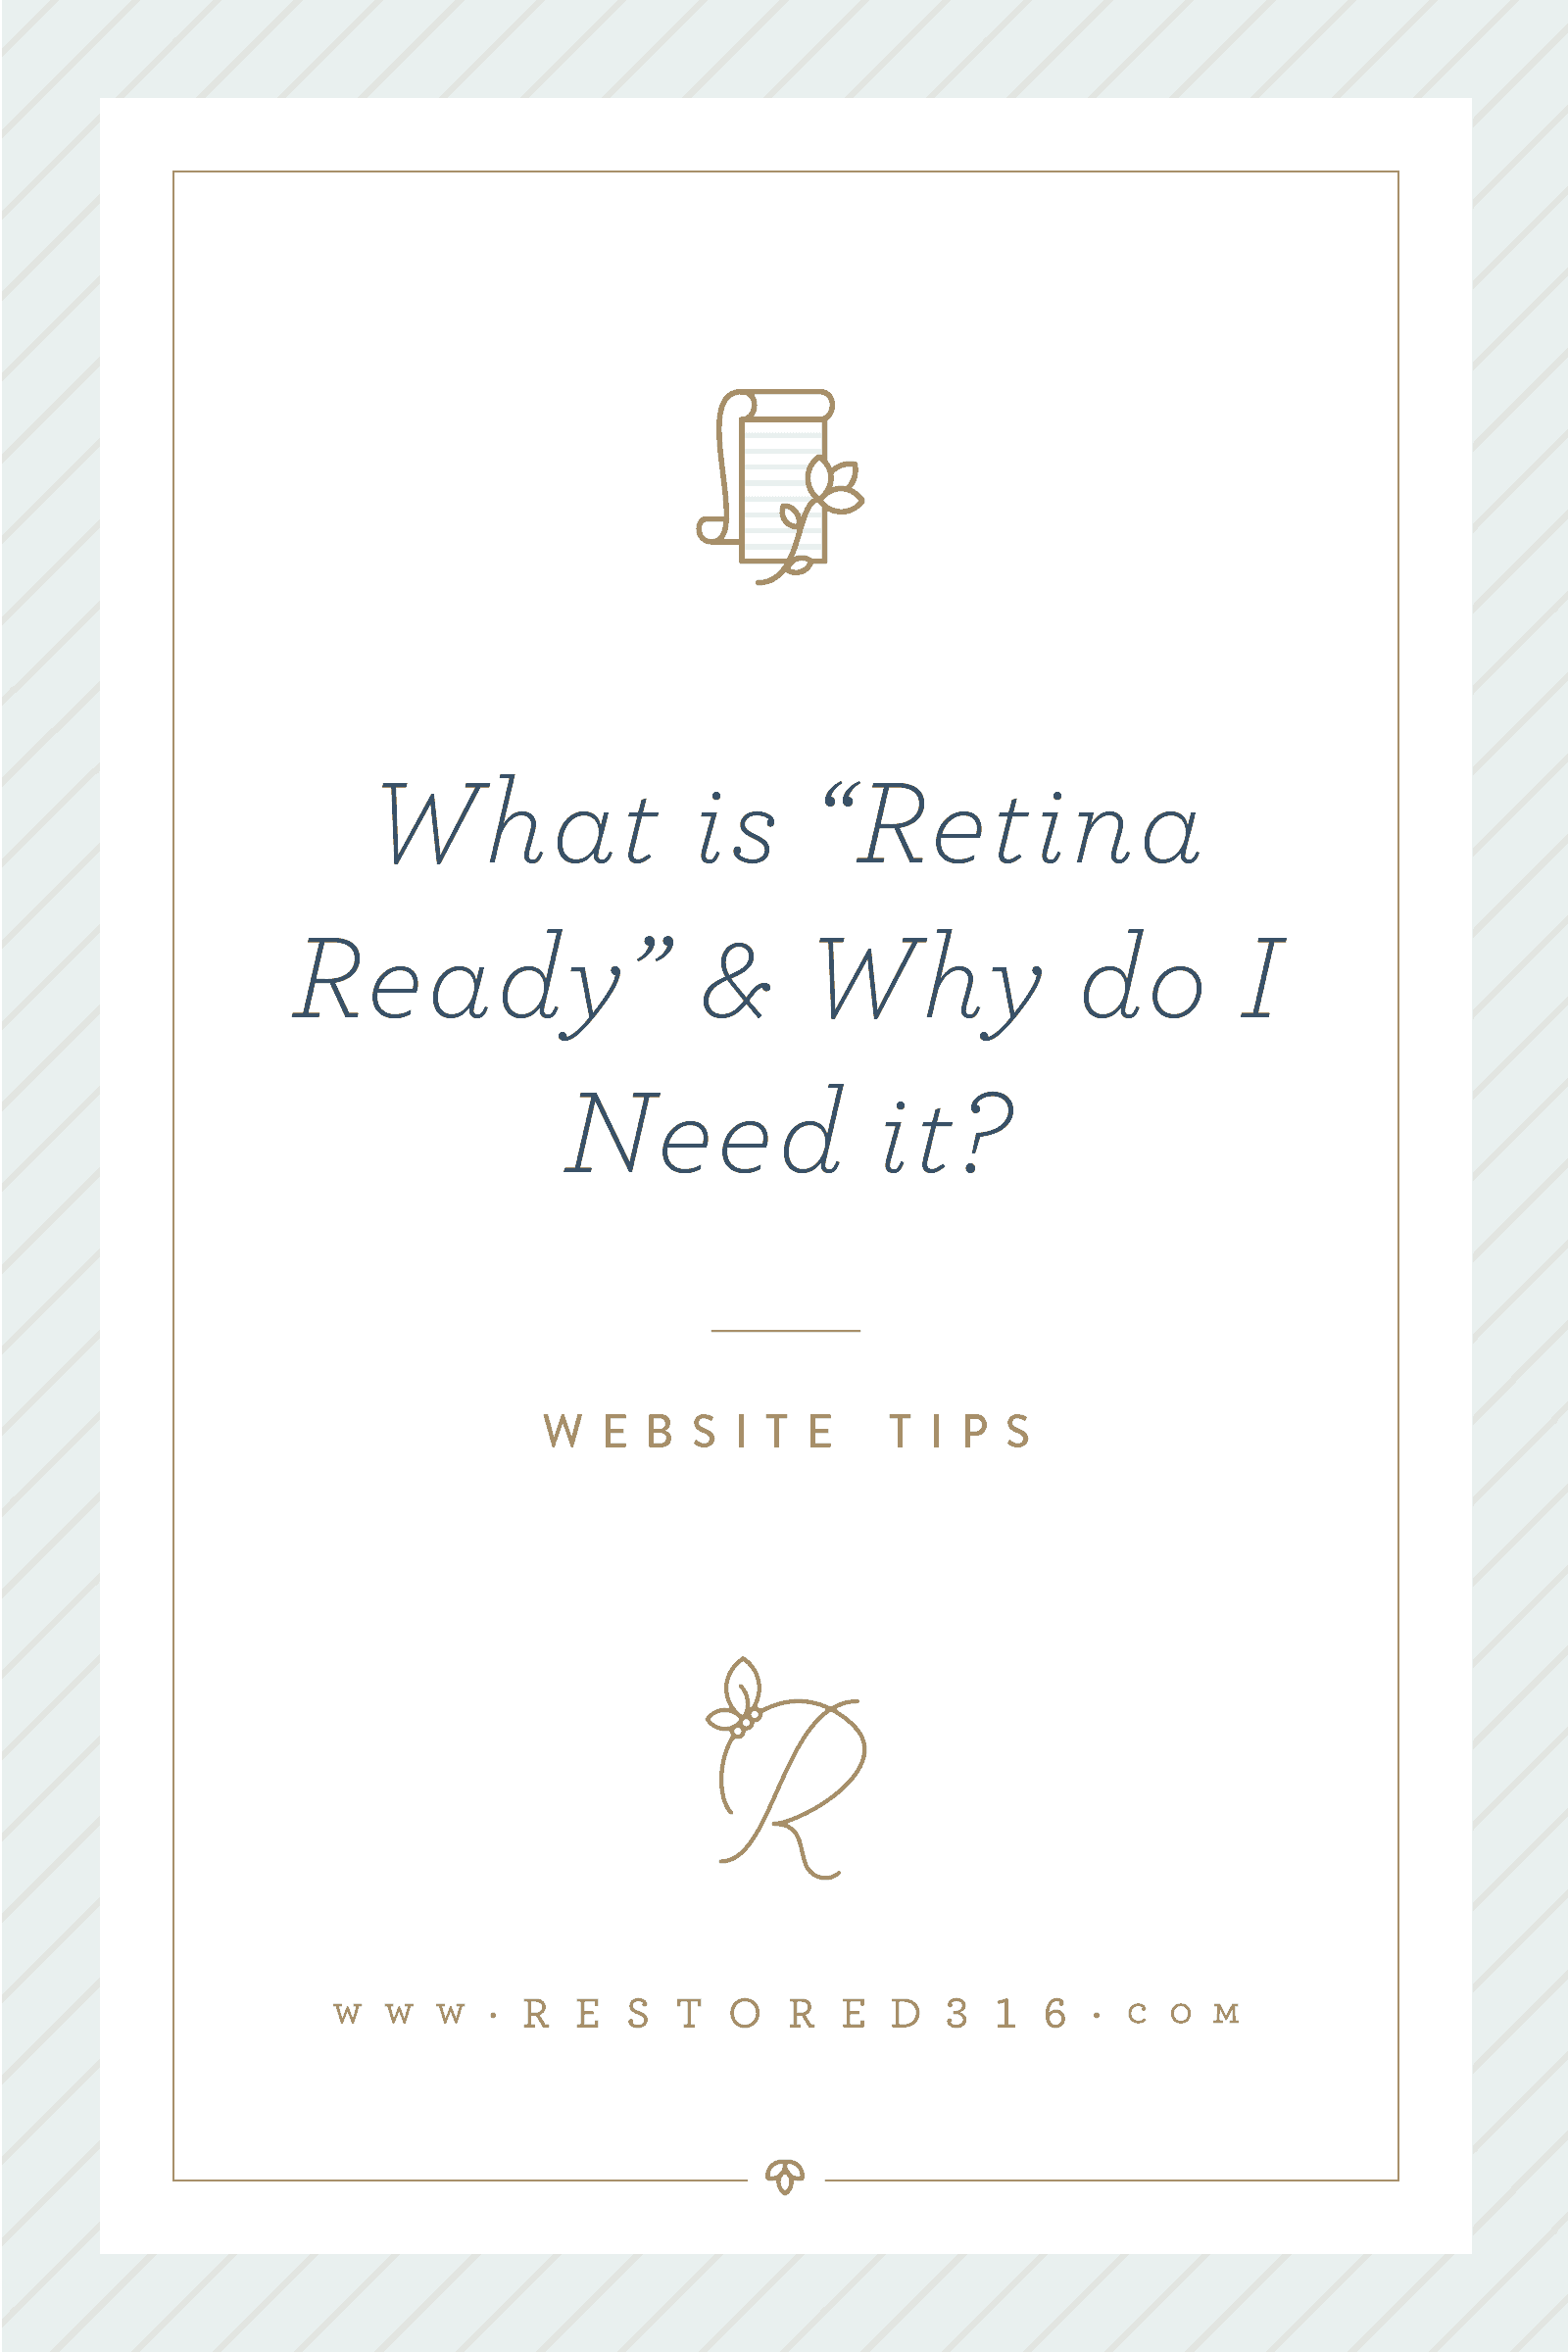 What is “Retina Ready” & Why do I need it?